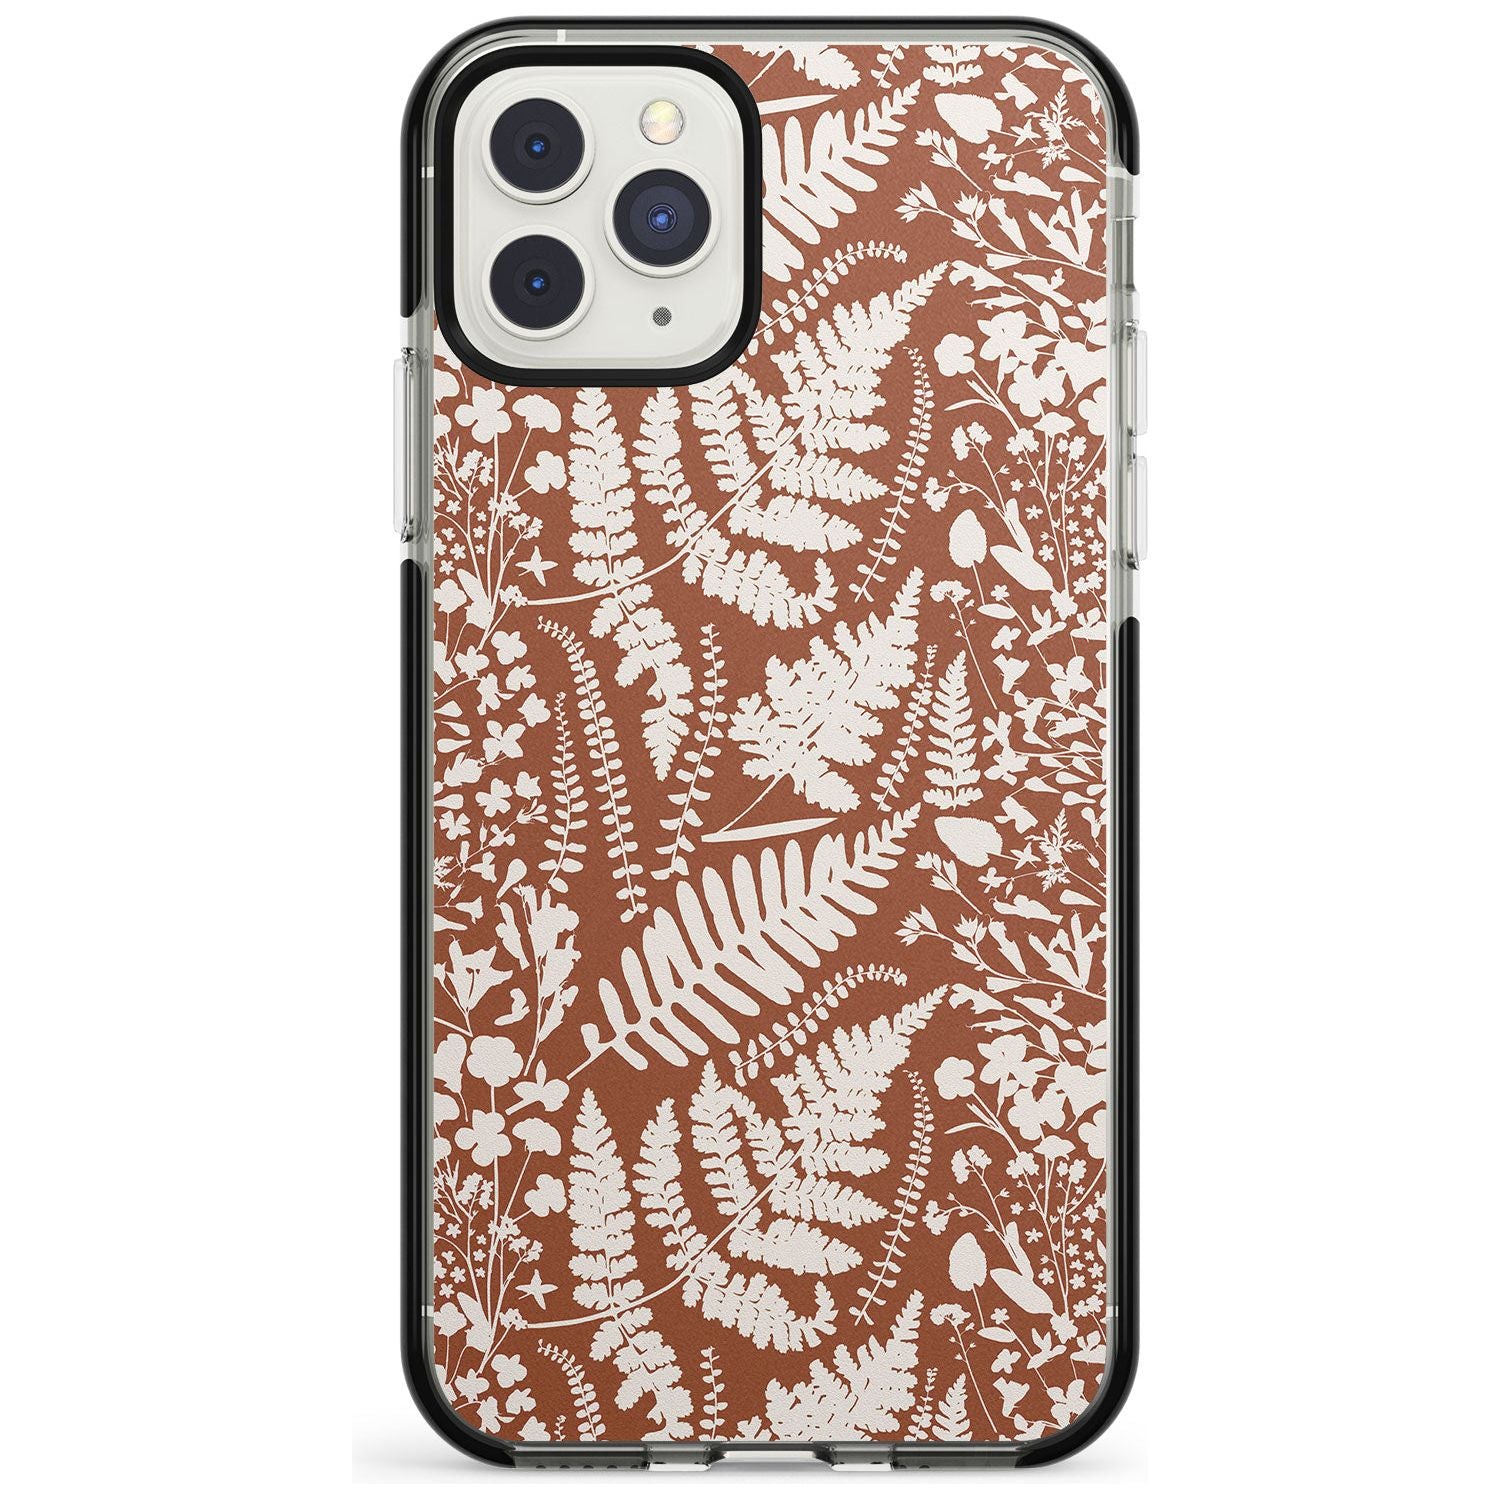 Wildflowers and Ferns on Terracotta Black Impact Phone Case for iPhone 11 Pro Max